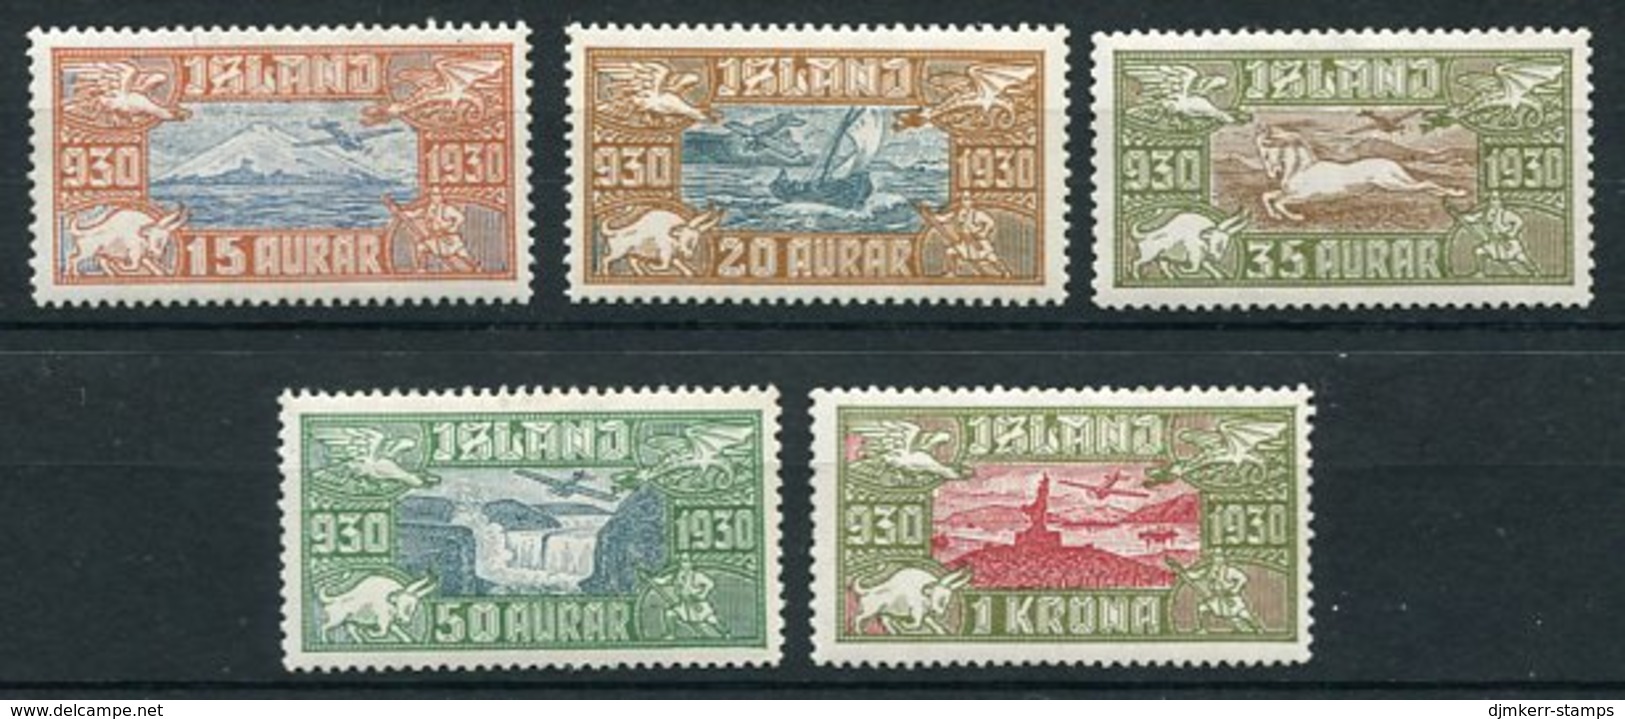 ICELAND 1930 Millenary Airmail Set Of 5 LHM / *.  Michel 142-46; Facit 189-93 - Nuevos